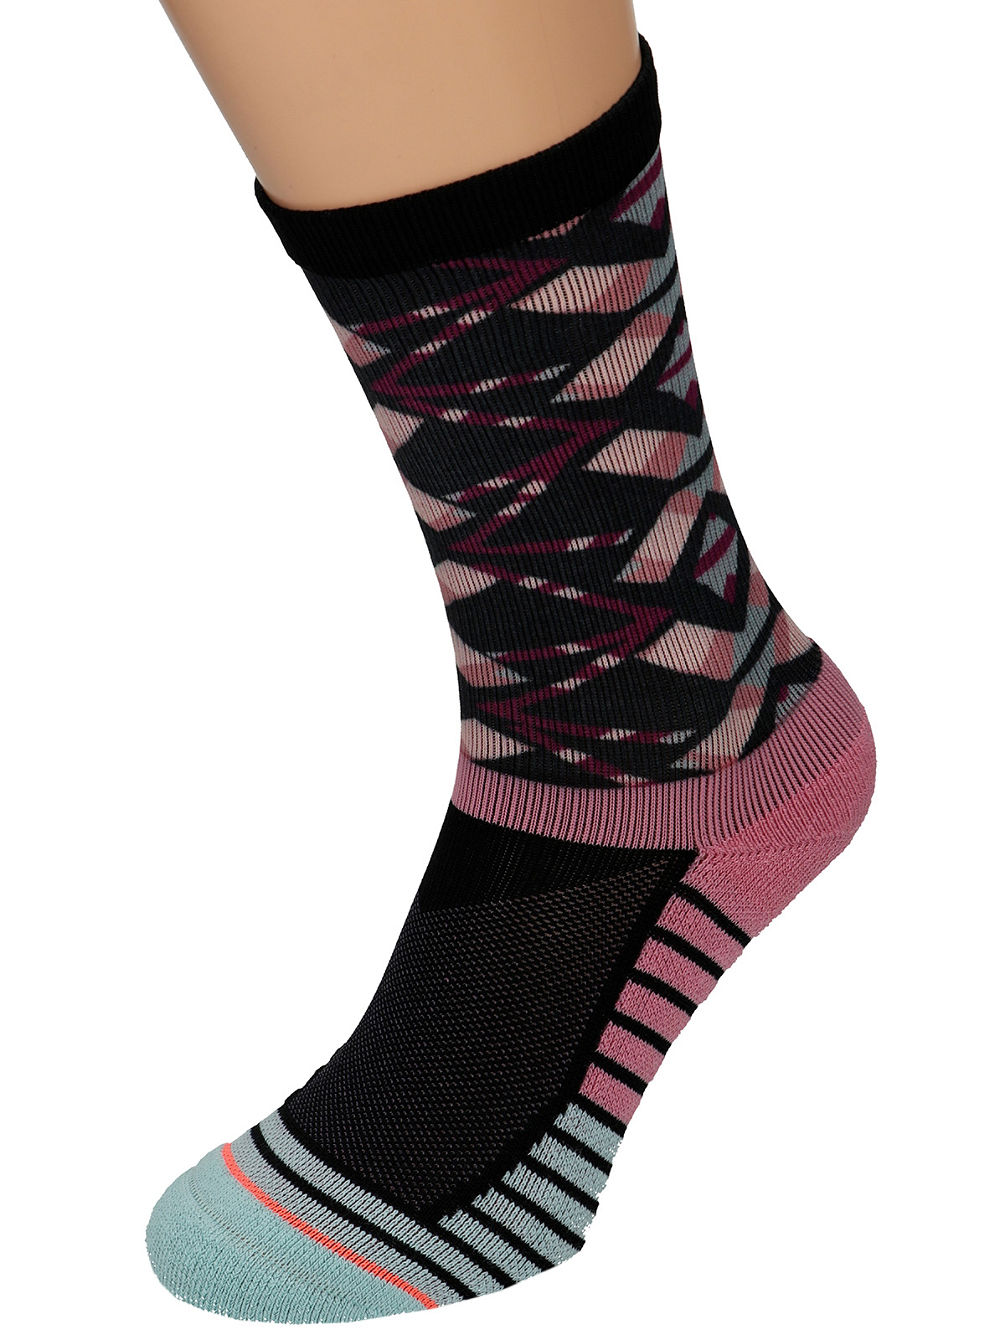 Axis Crew Athletic Chaussettes